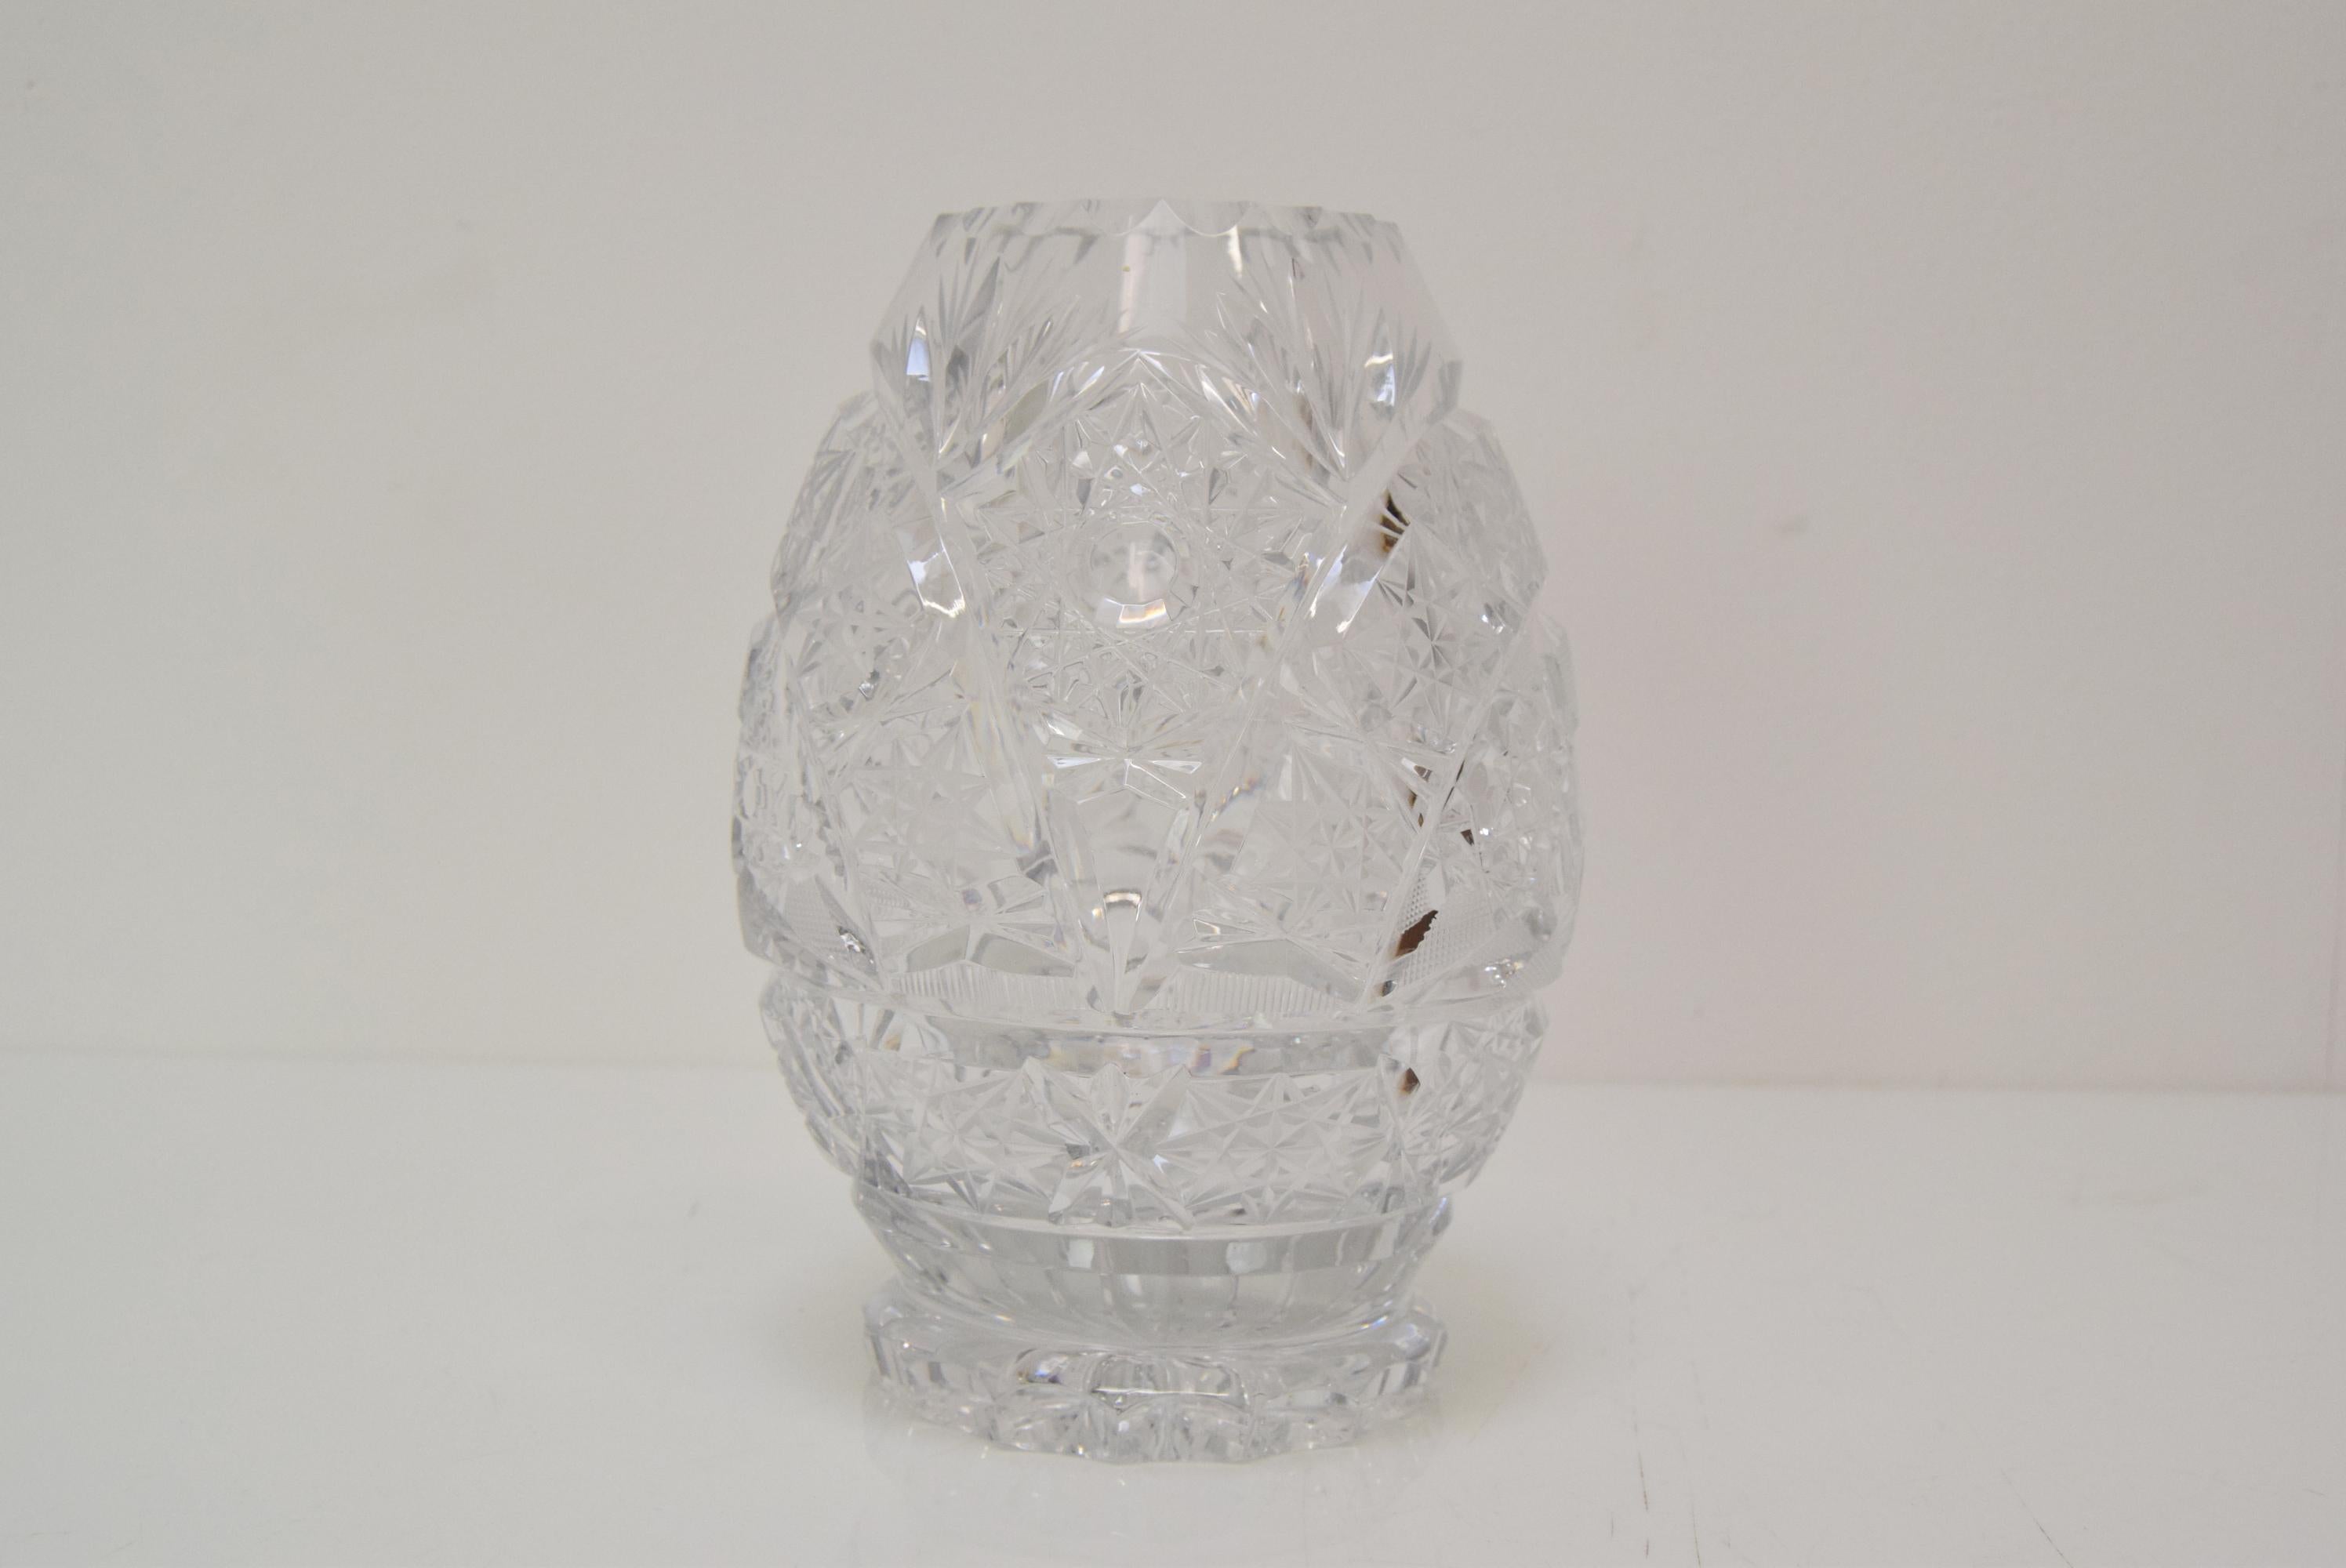 
Made in Czechoslovakia
Made of Crystal Glass,Cut Glass
Hand Made
Re-polished
Good Original Condition